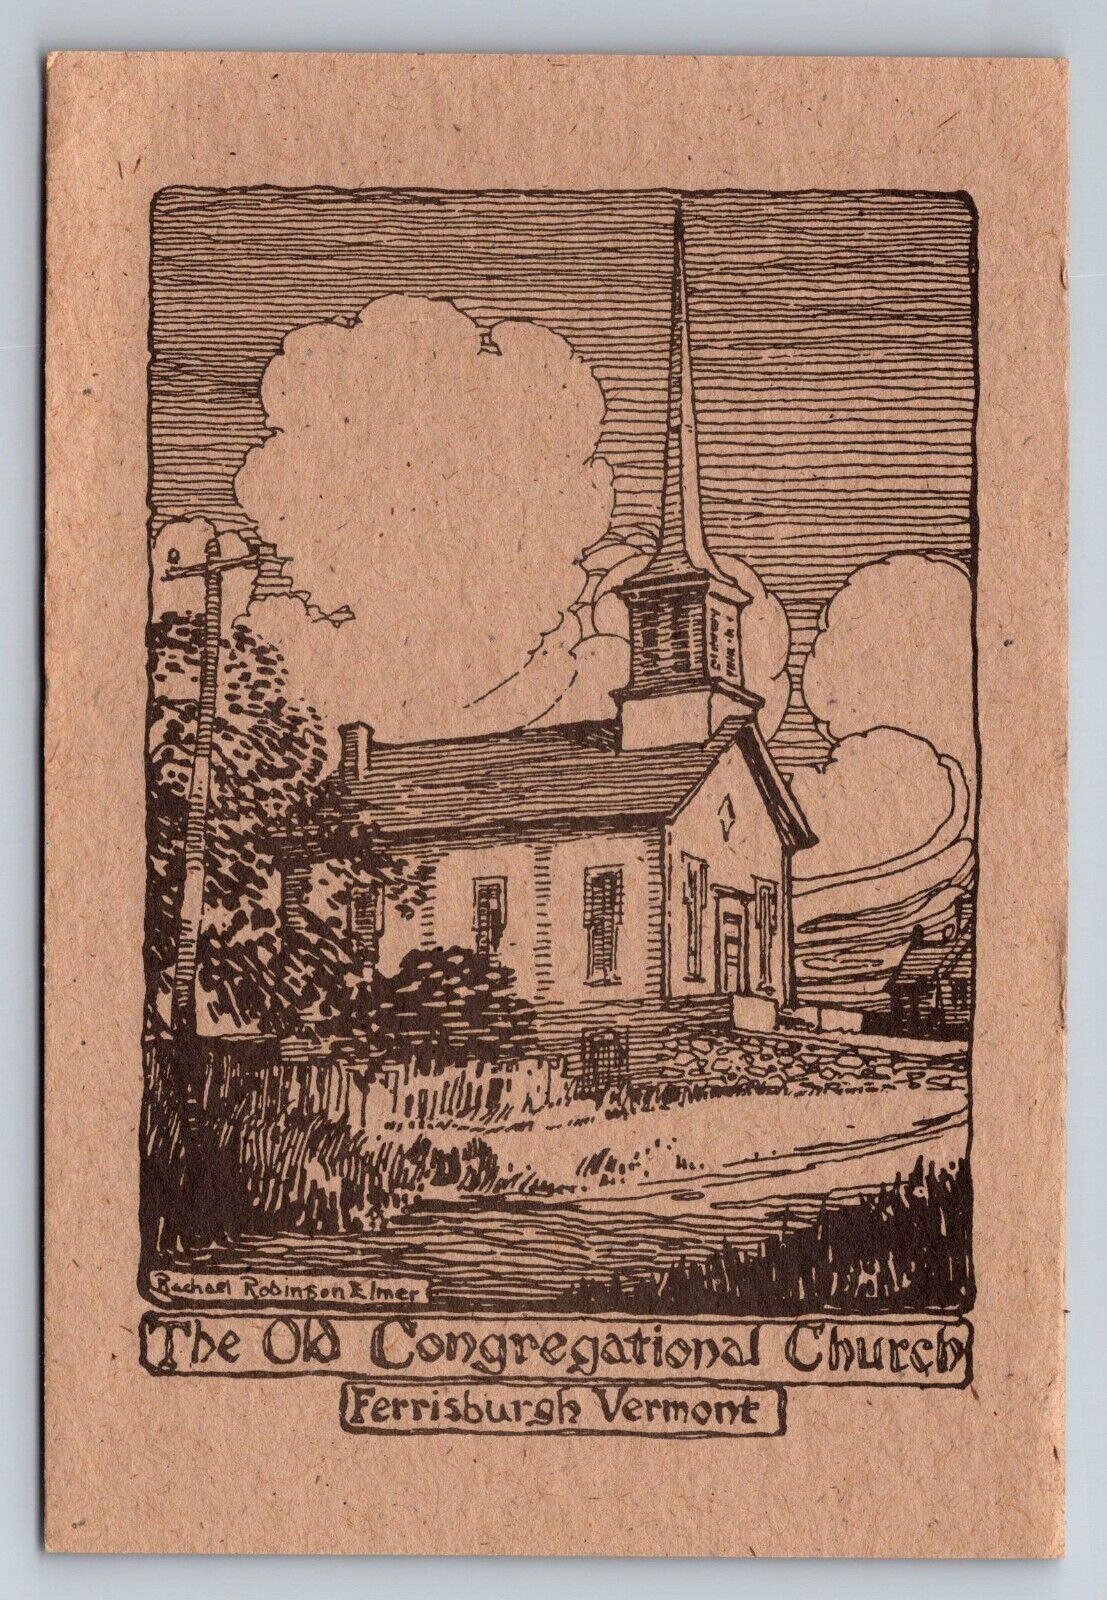 Old Congregational Church Ferrisburgh Vermont Vintage Limited Edition Postcard